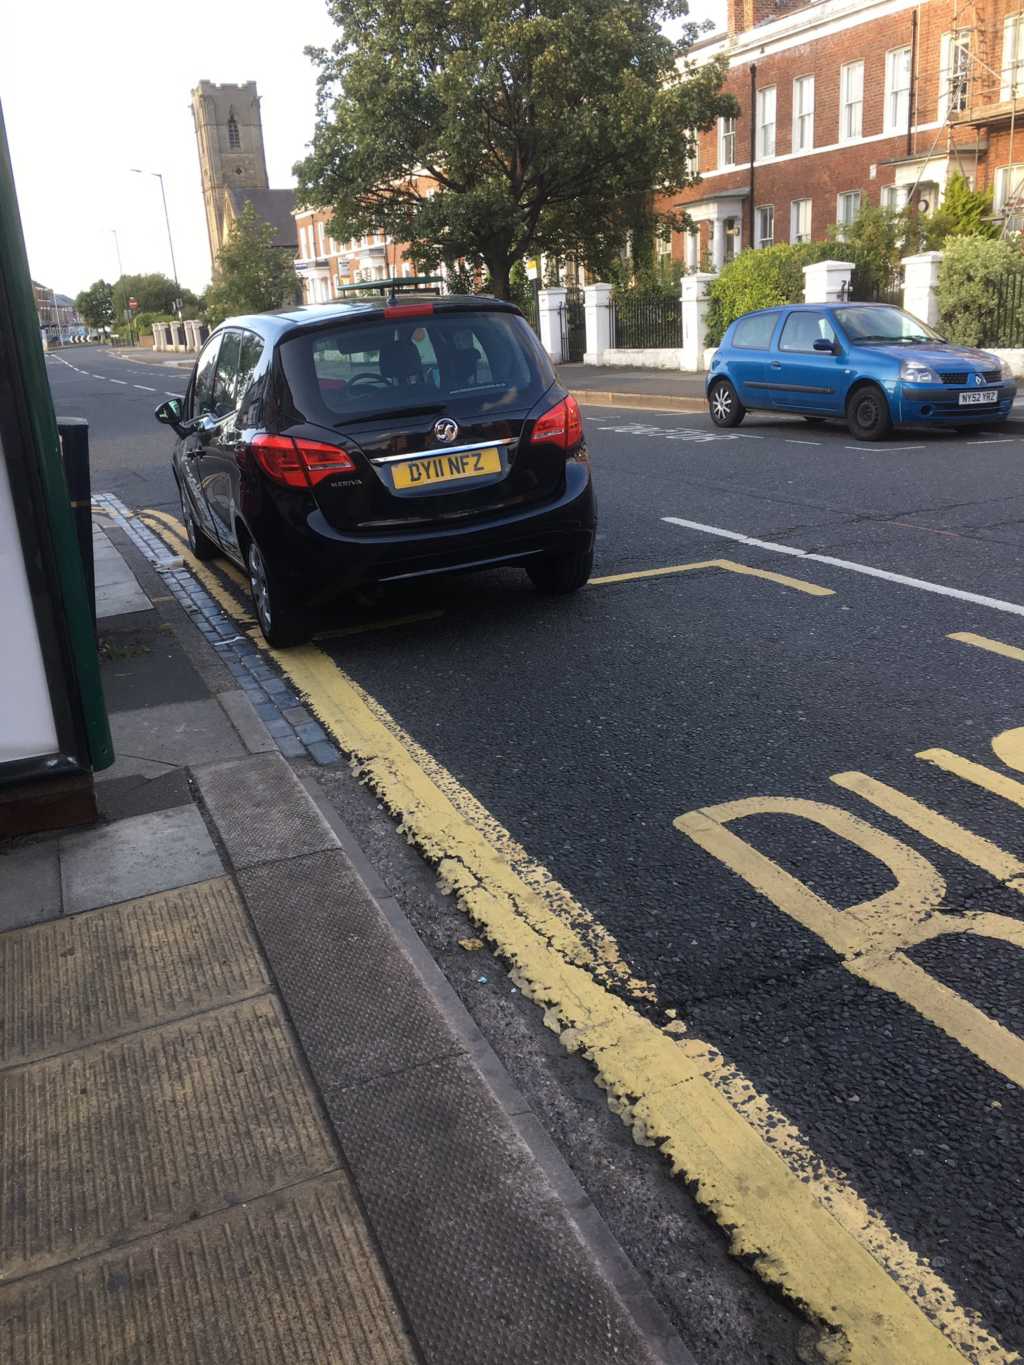 DY11 NFZ displaying Inconsiderate Parking